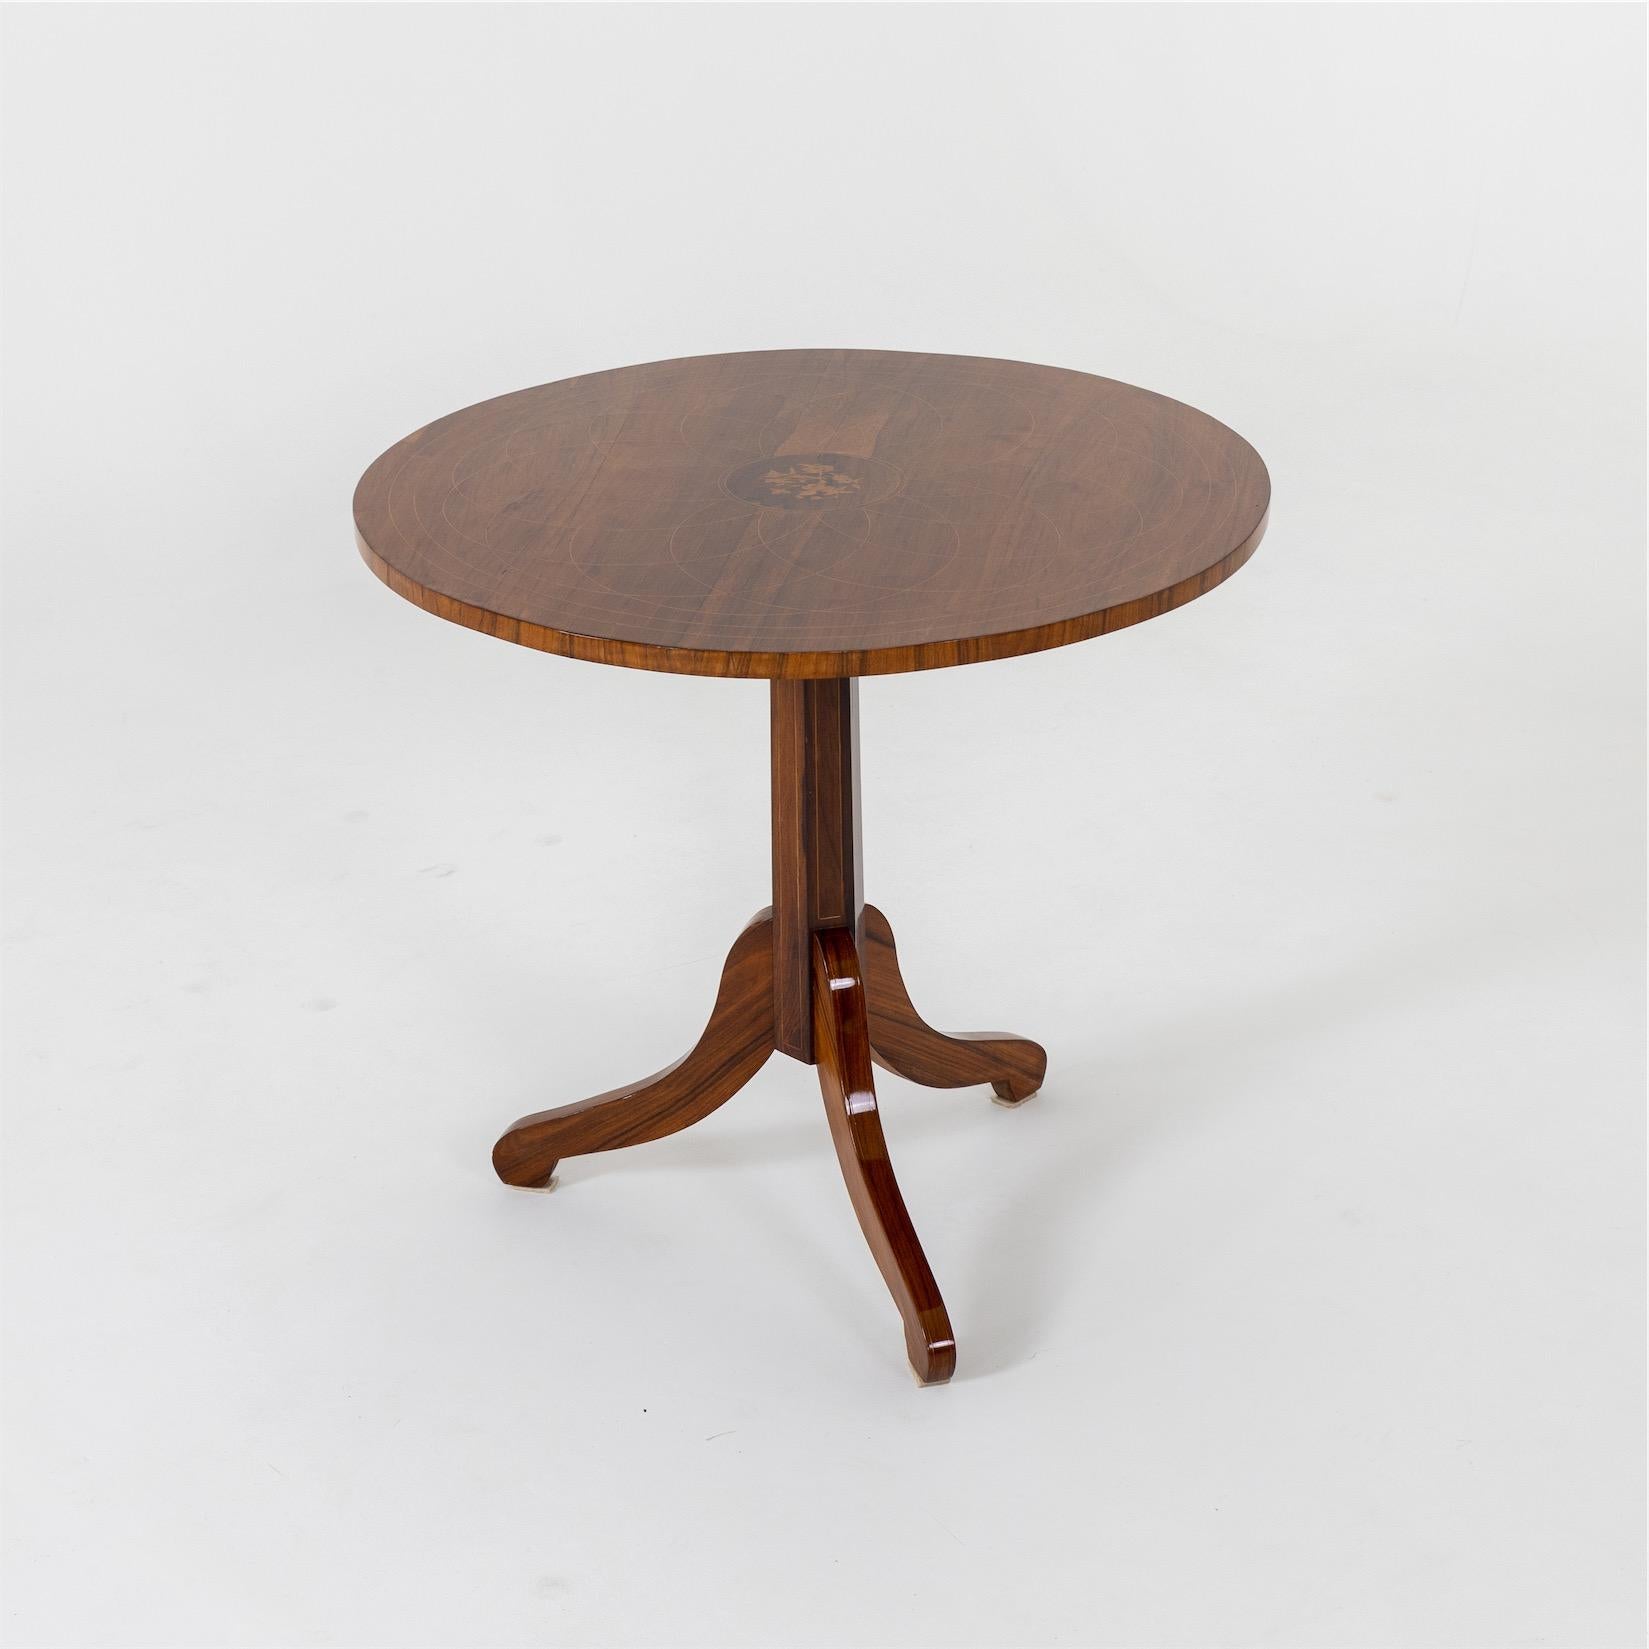 French Charles X Side Table, France, around 1830